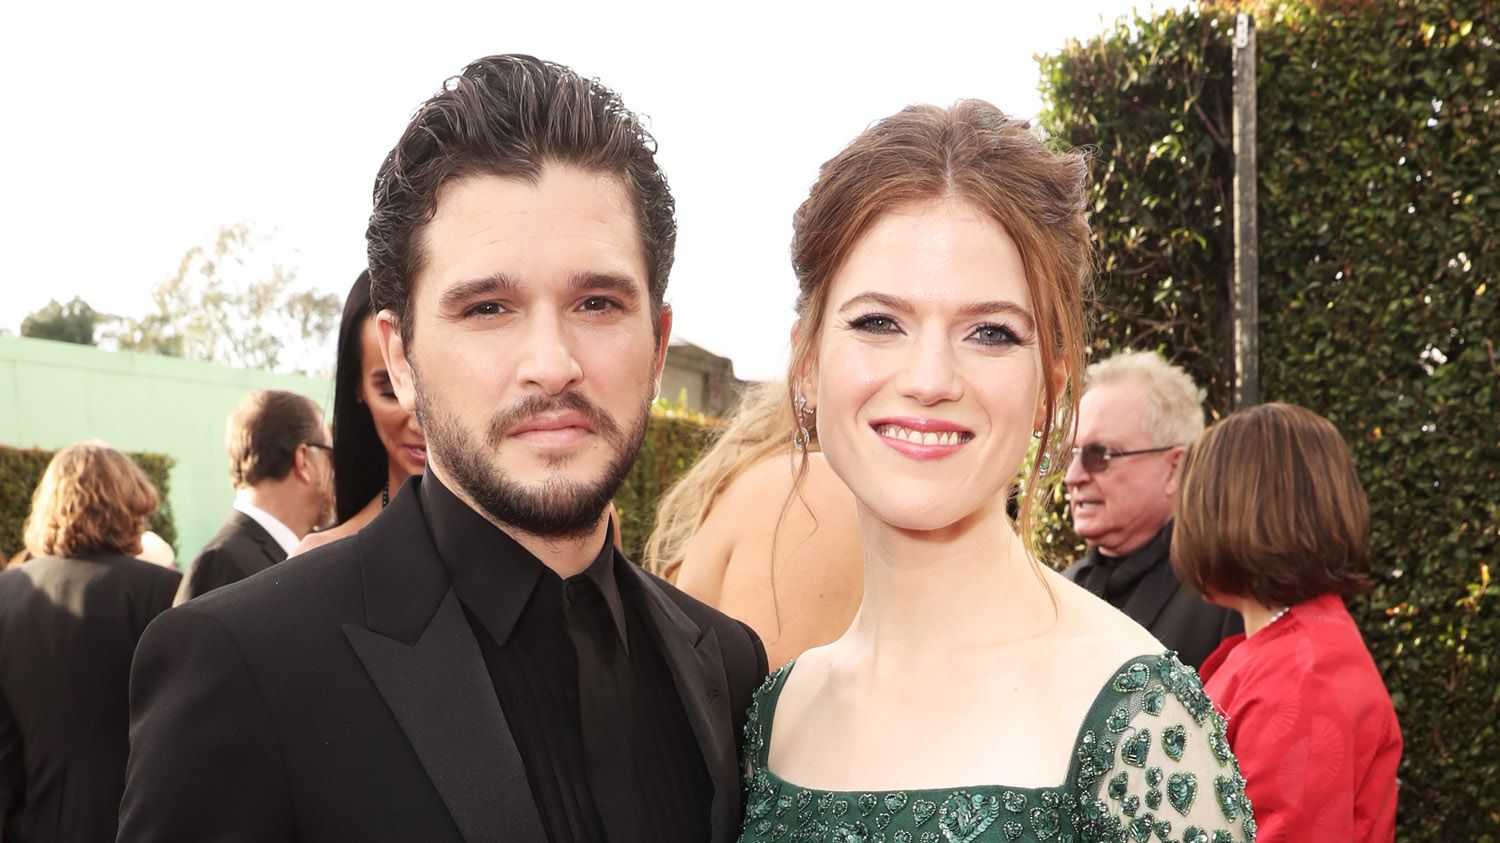 Game Of Thrones stars Kit Harington and Rose Leslie welcome a baby boy